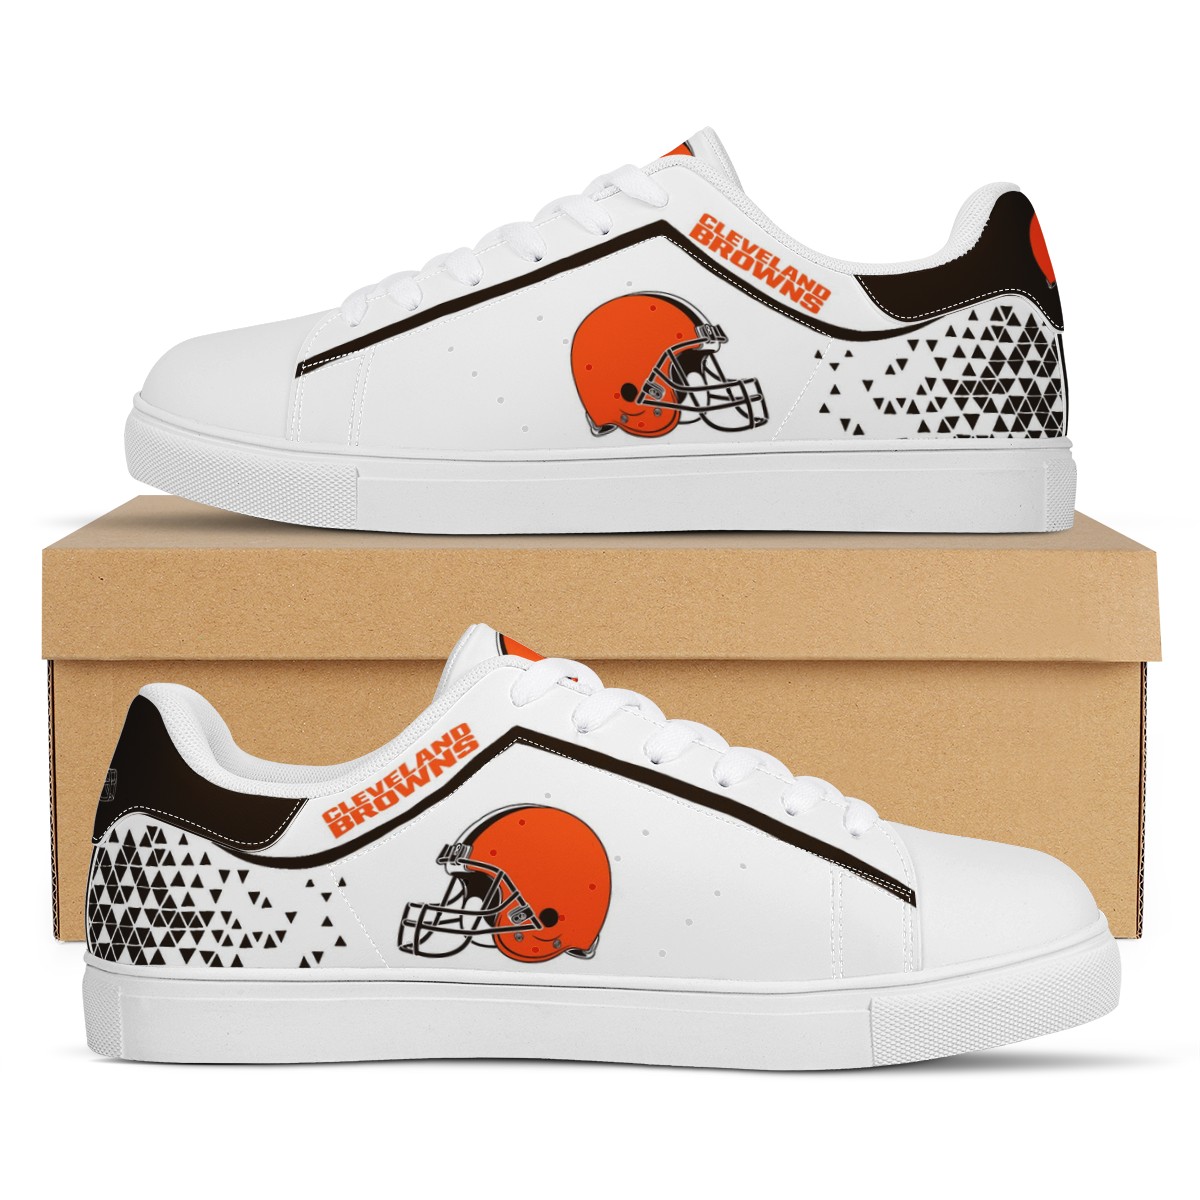 Men's Cleveland Browns Low Top Leather Sneakers 001